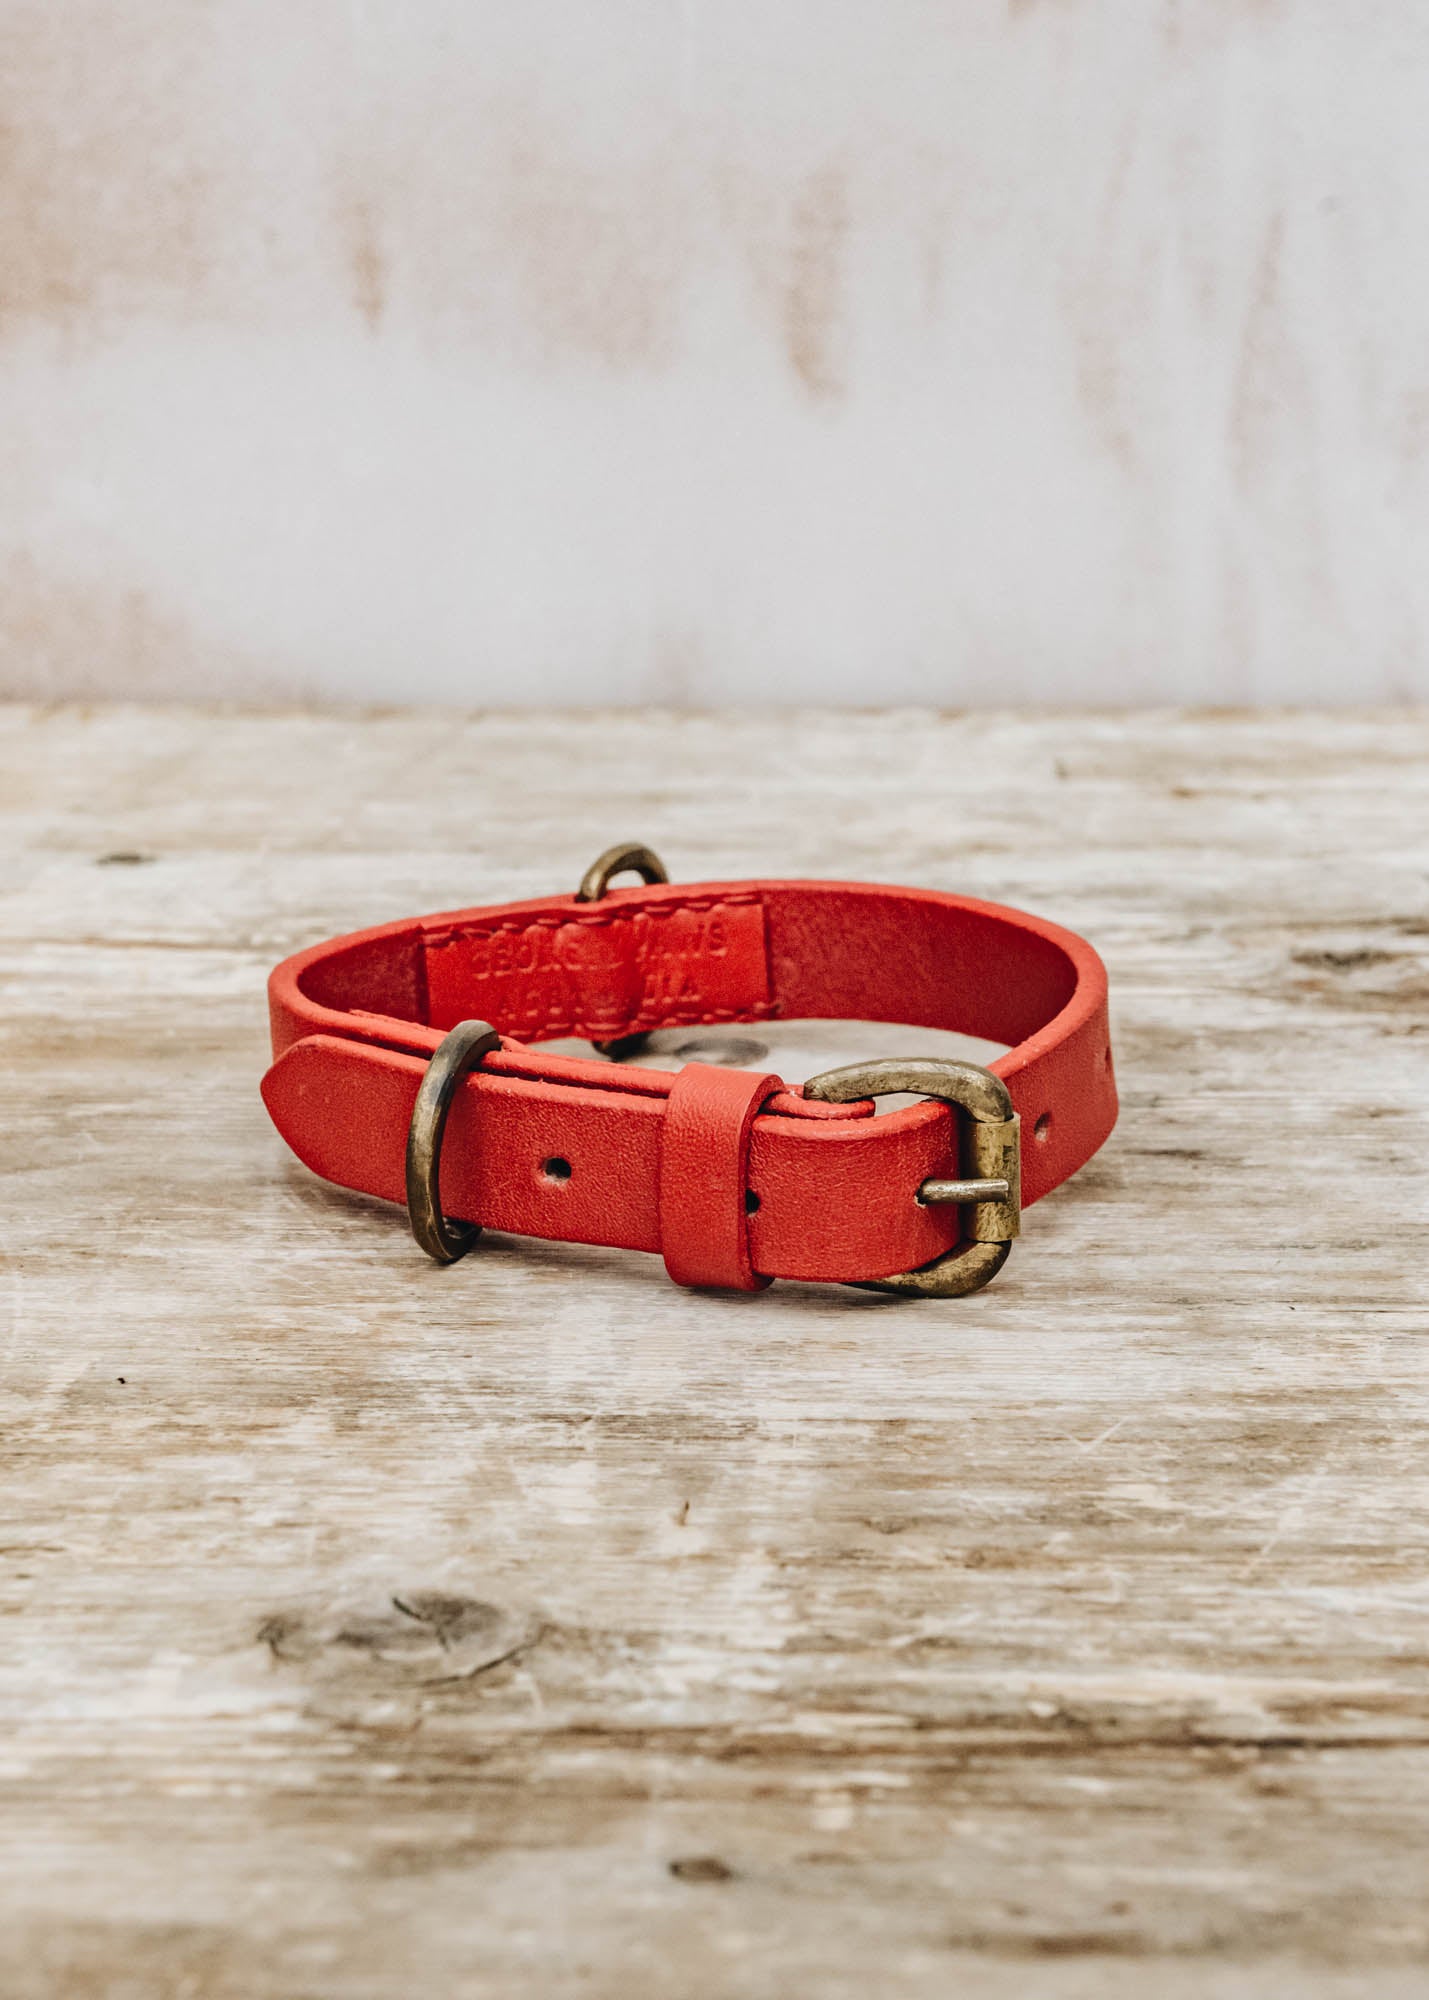 Georgie Paws Bald Leather Dog Collar in Red